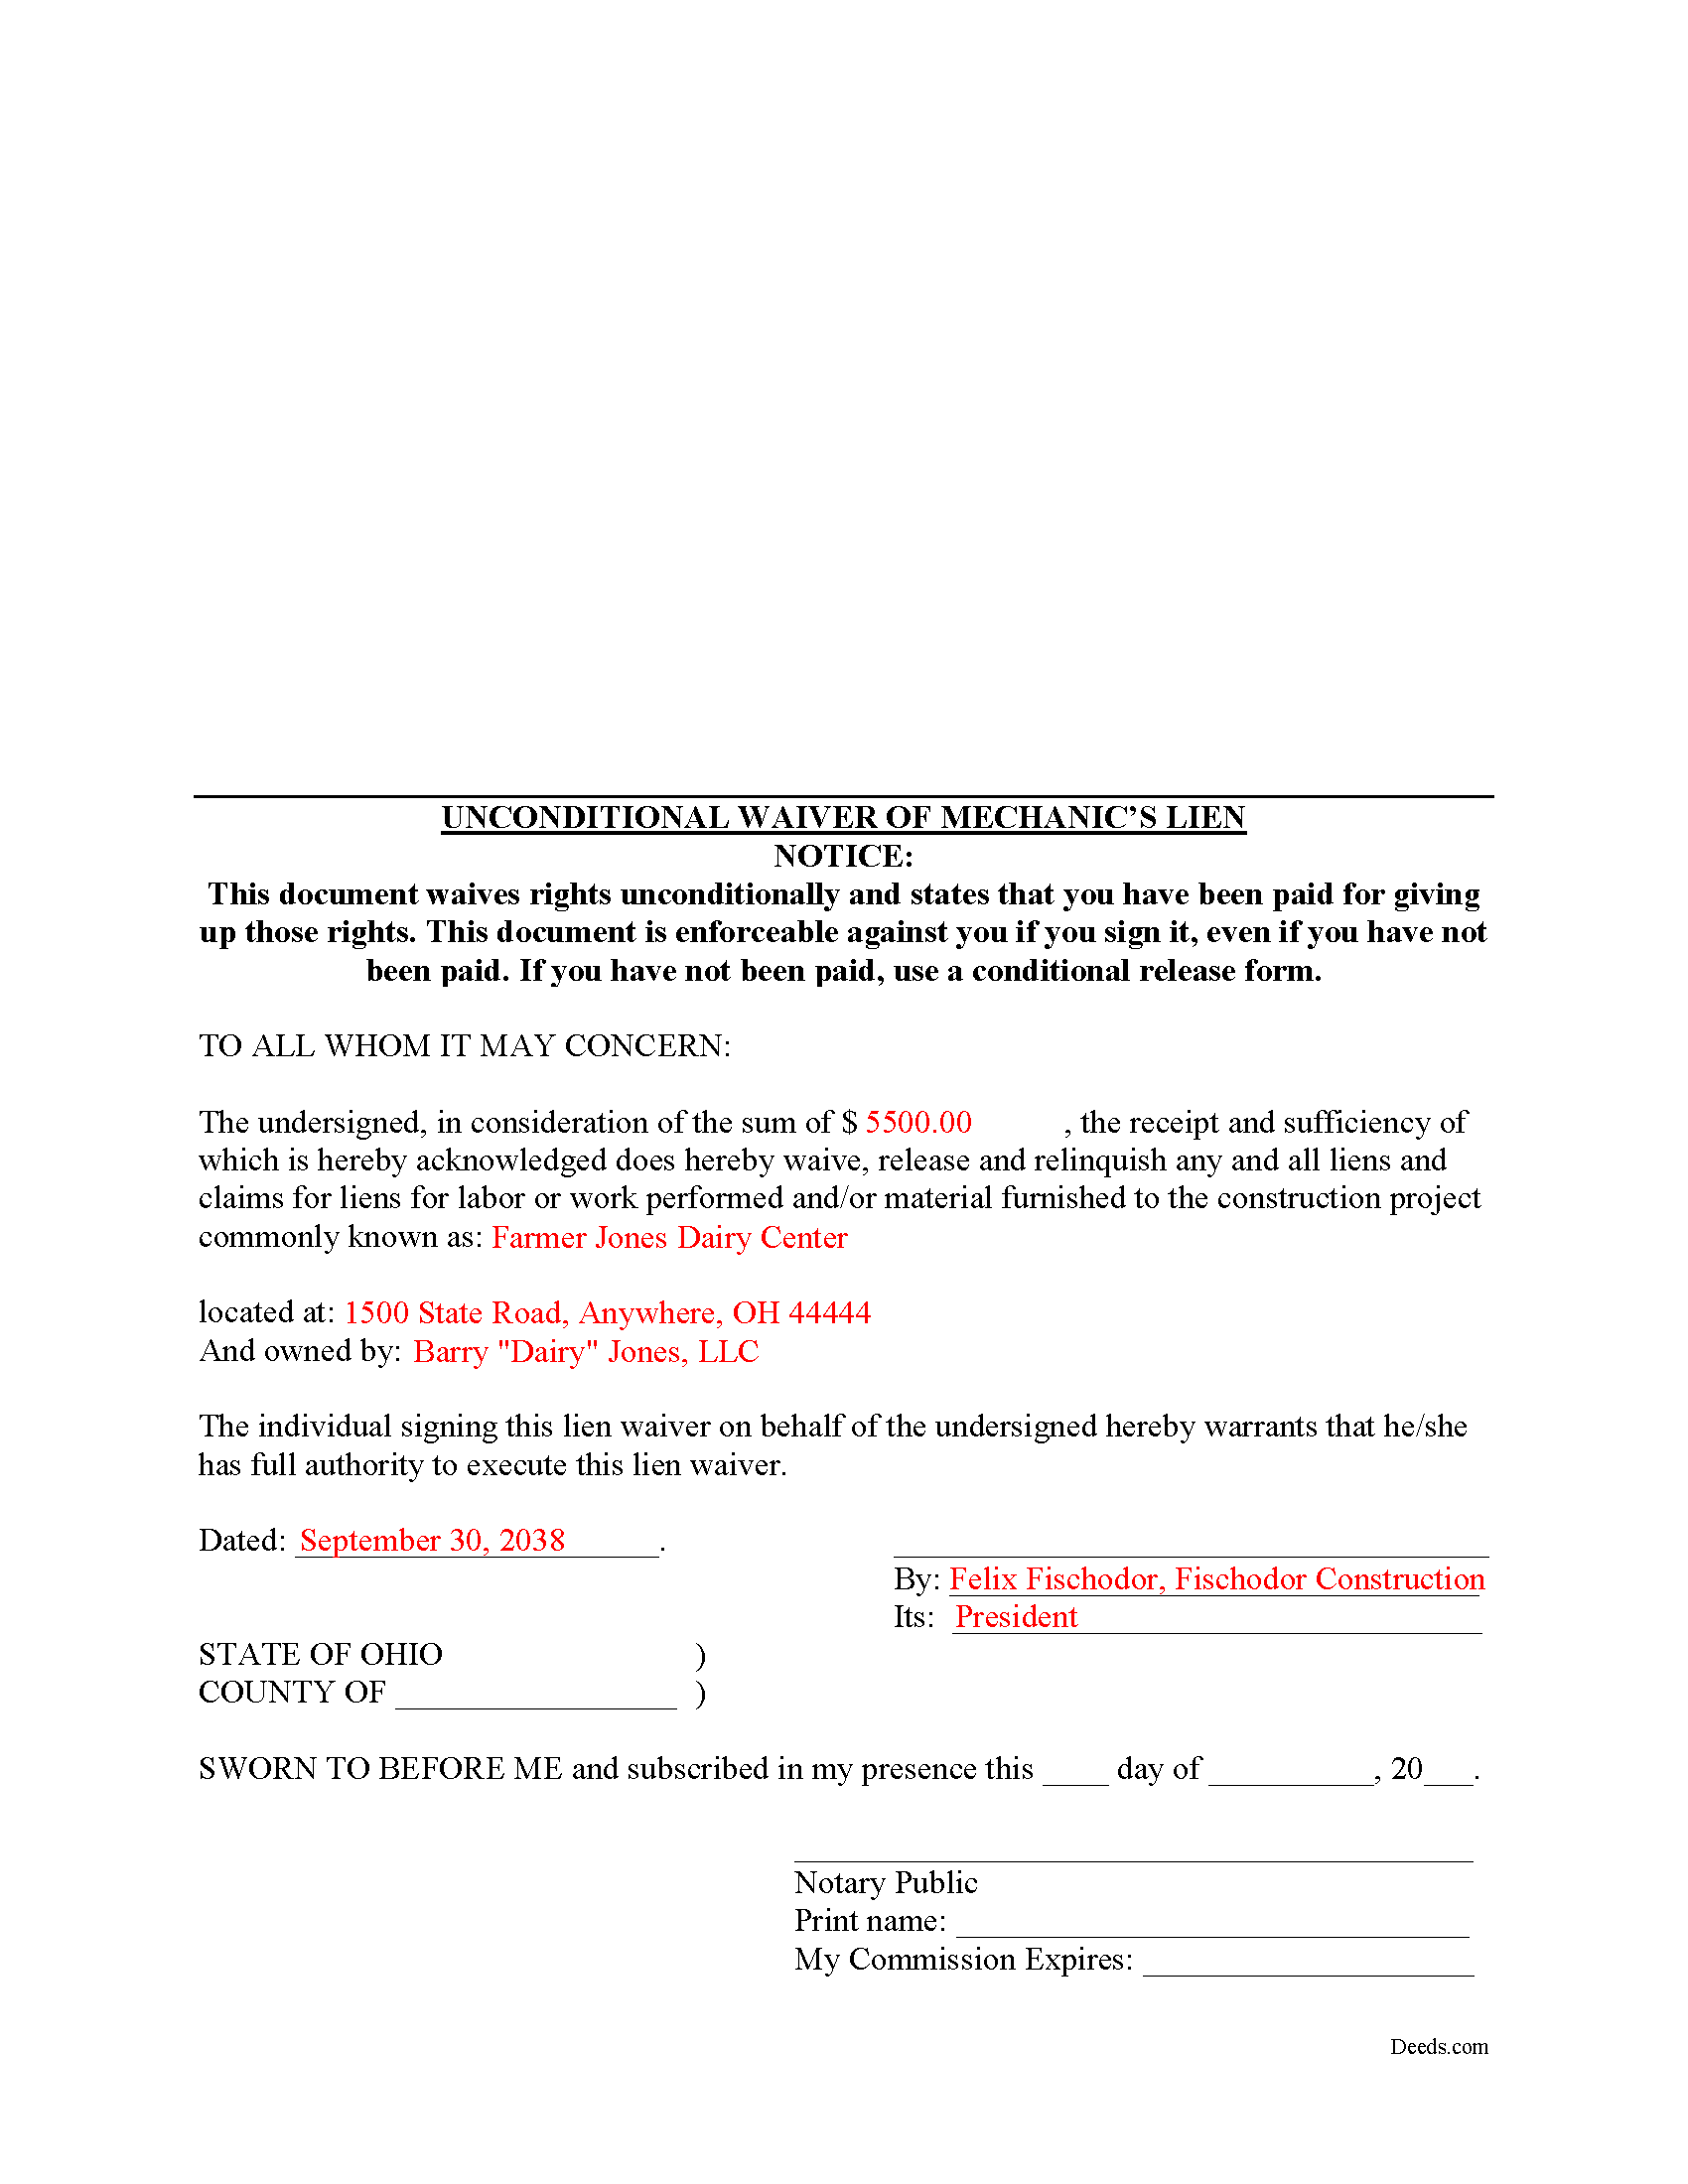 Completed Example of the Unconditional Lien Waiver Document